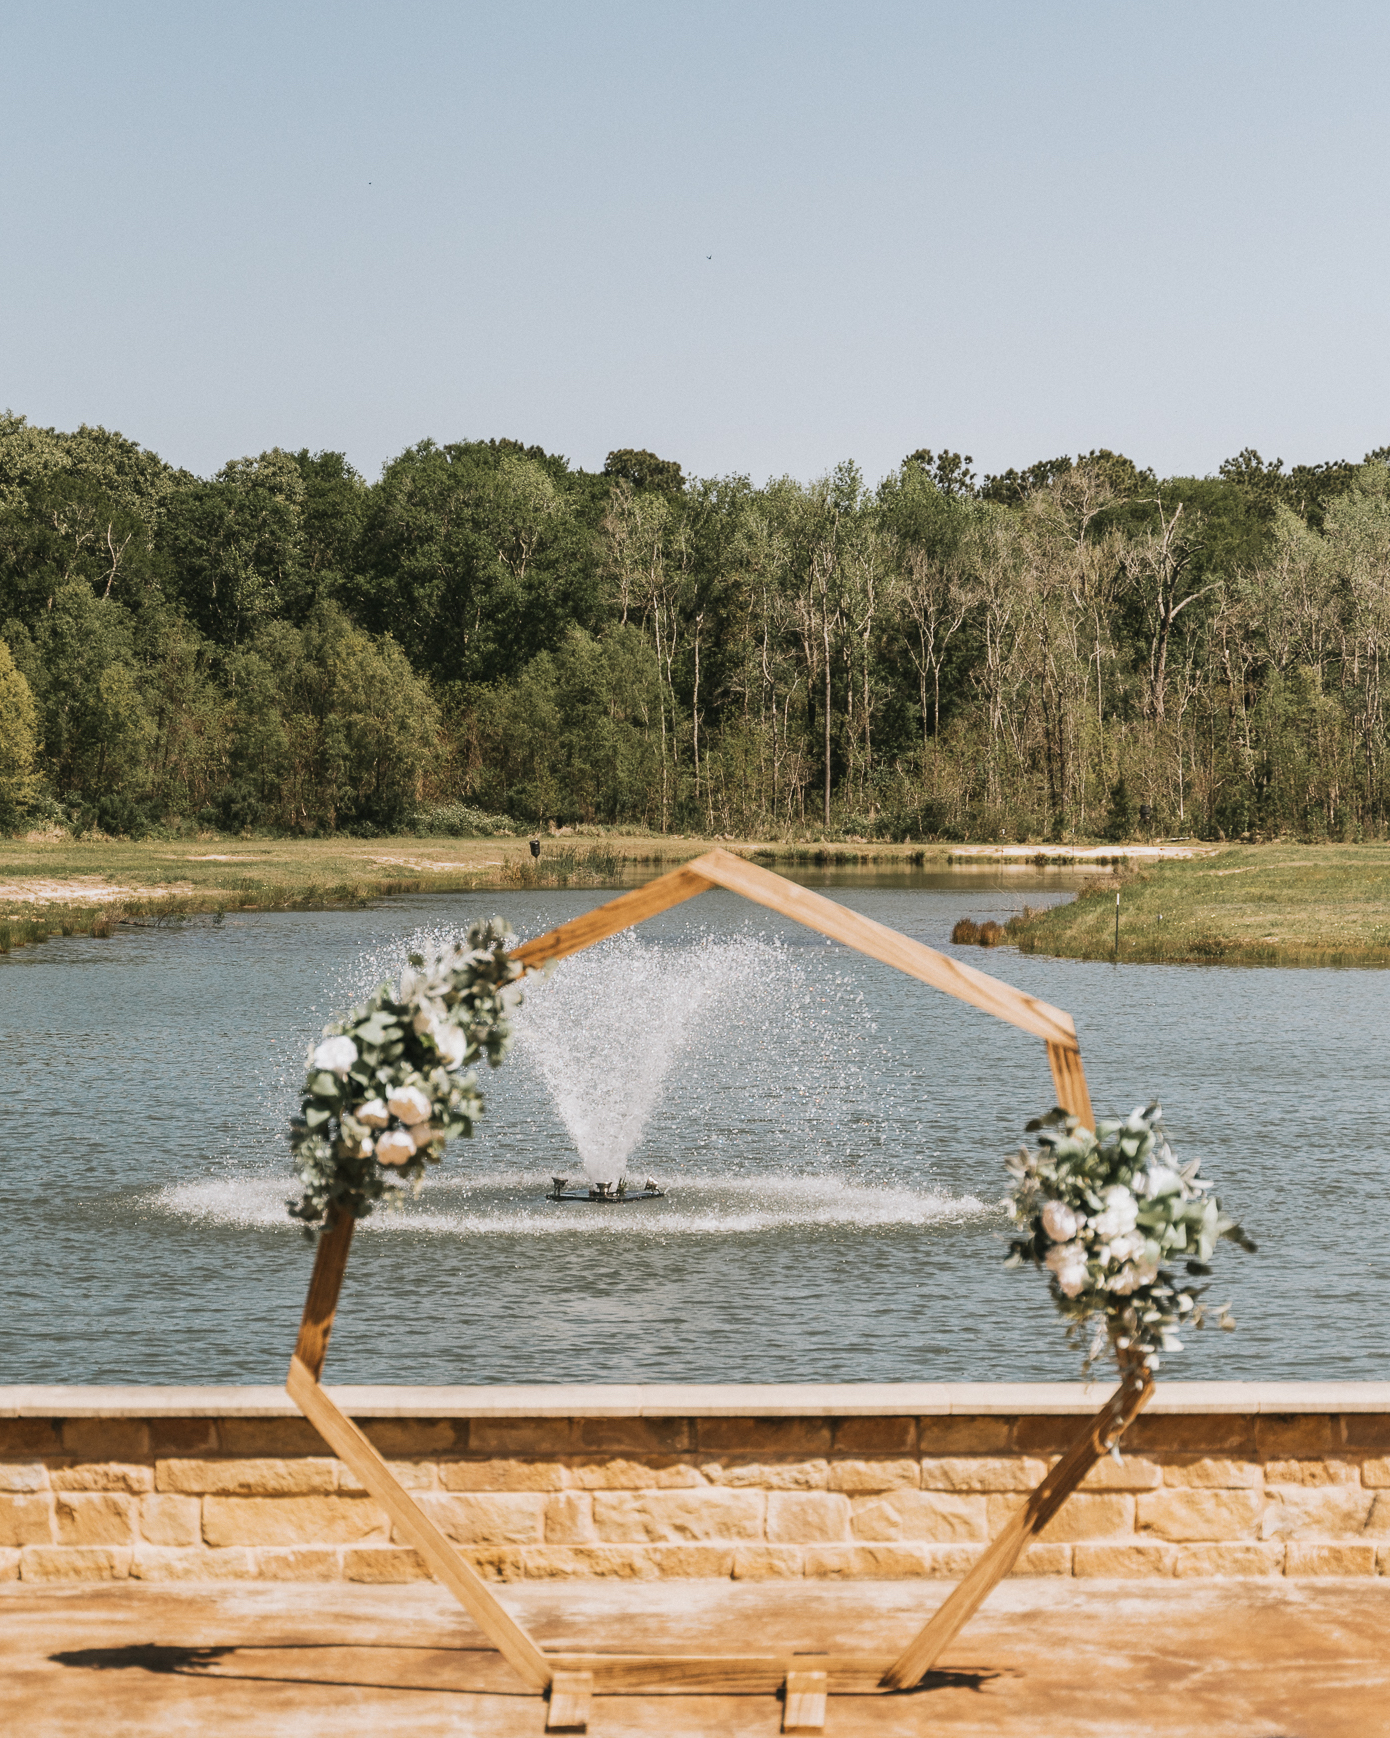 A pond is the view through an archway decorated with greenery and flowers at a secluded luxury venue called The Hundred Oaks Event Center.